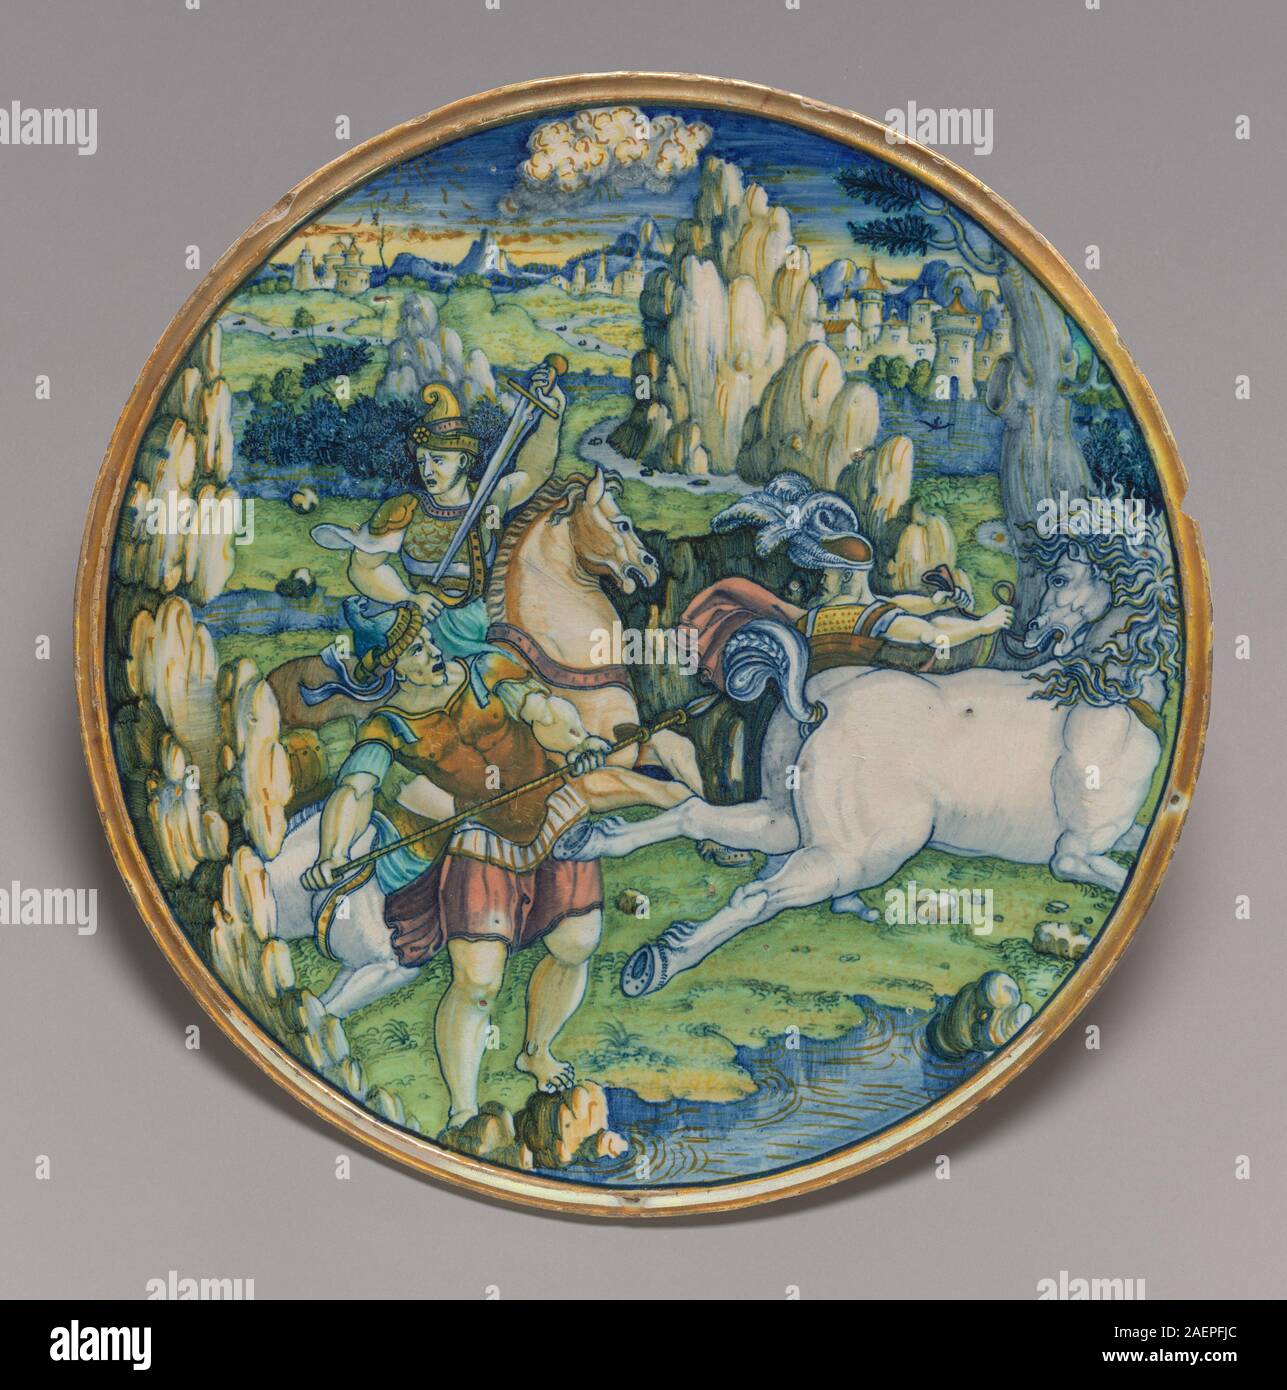 Workshop of Maestro Giorgio Andreoli of Gubbio; painting by the Painter of the Three Graces, Flat plate with a battle scene, 1525, Workshop of Maestro Giorgio Andreoli of Gubbio; painting by the Painter of the Three Graces, Flat plate with a battle scene, 1525, tin-glazed earthenware (maiolica), Widener Collection 1942.9.334 Stock Photo